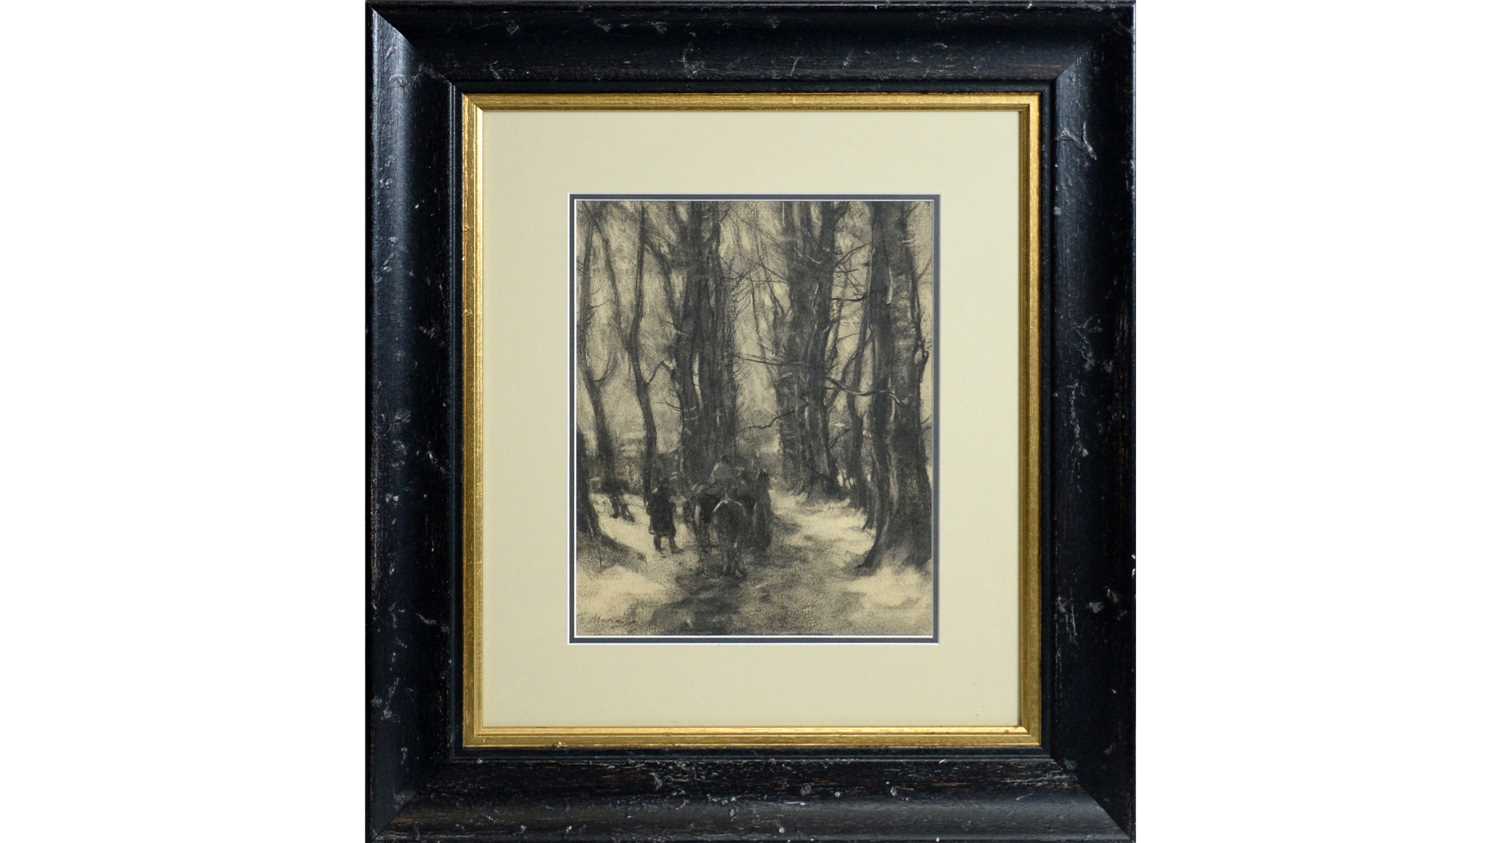 Lot 53 - 19th Century Continental School - Horseback Riding Through a Frozen Forest | charcoal